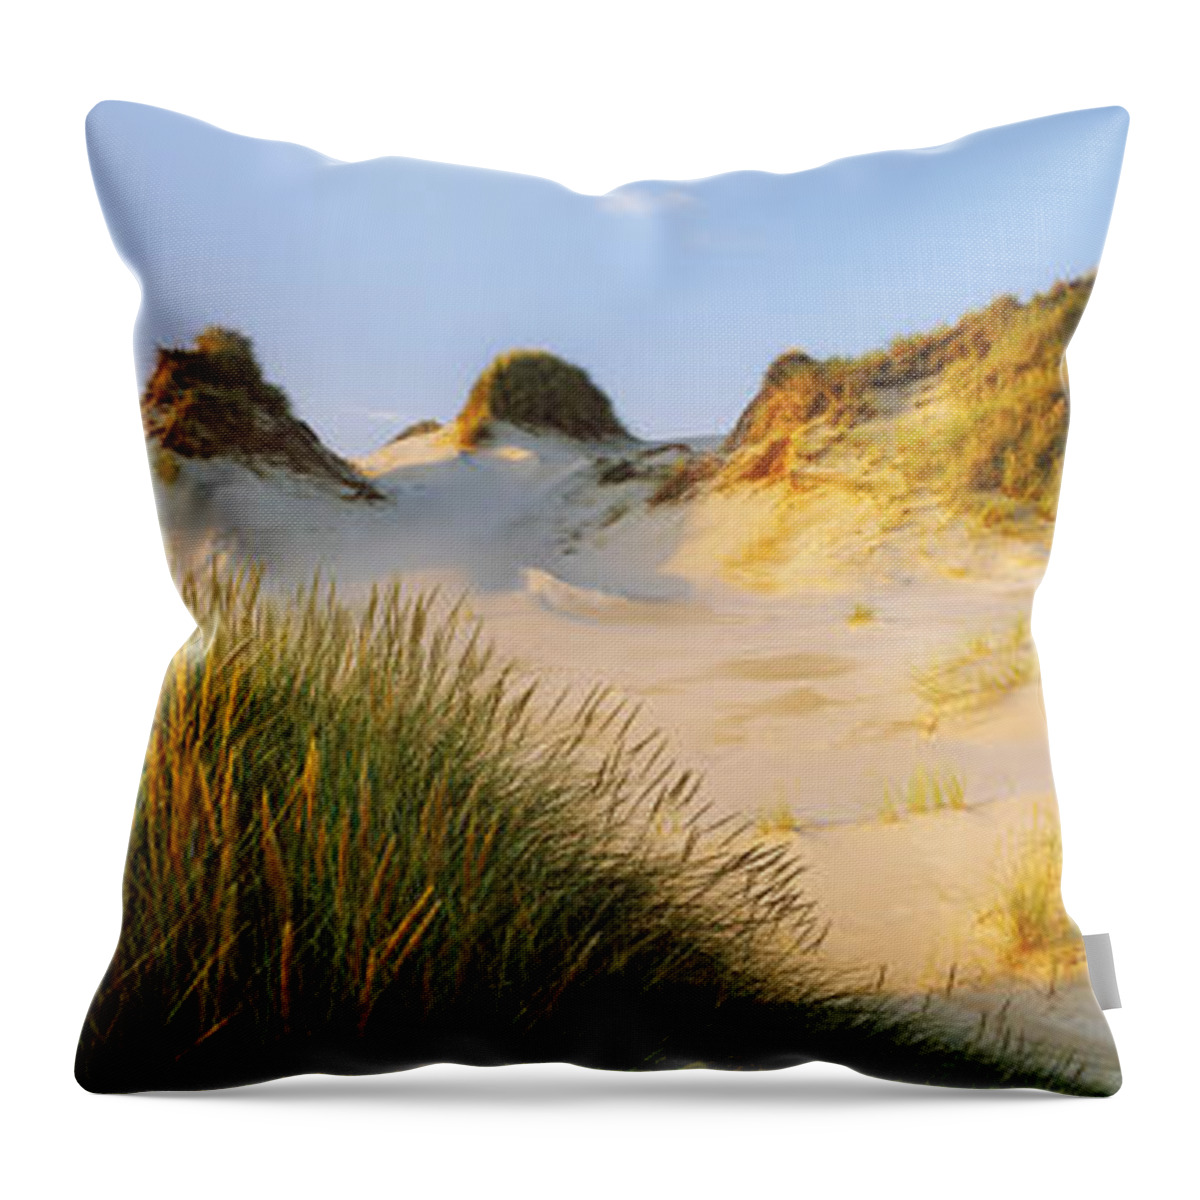 Photography Throw Pillow featuring the photograph Morning Light On Forvie Dunes by Panoramic Images